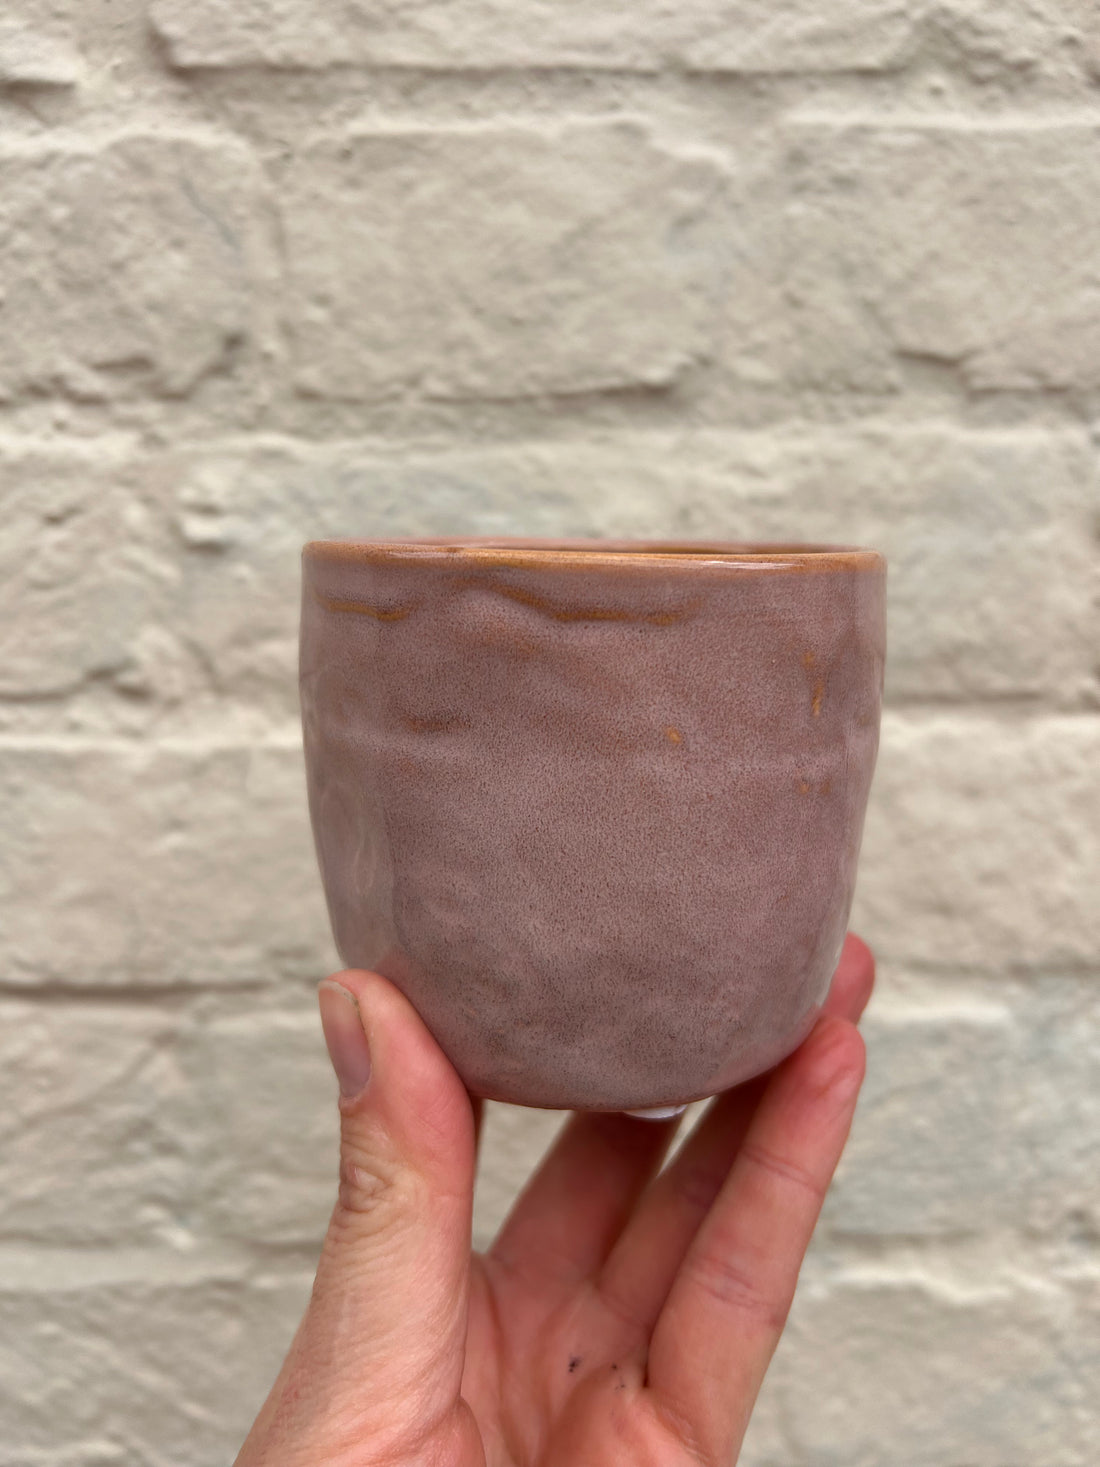 Small ceramic pots to house nursery pots 7cm or below